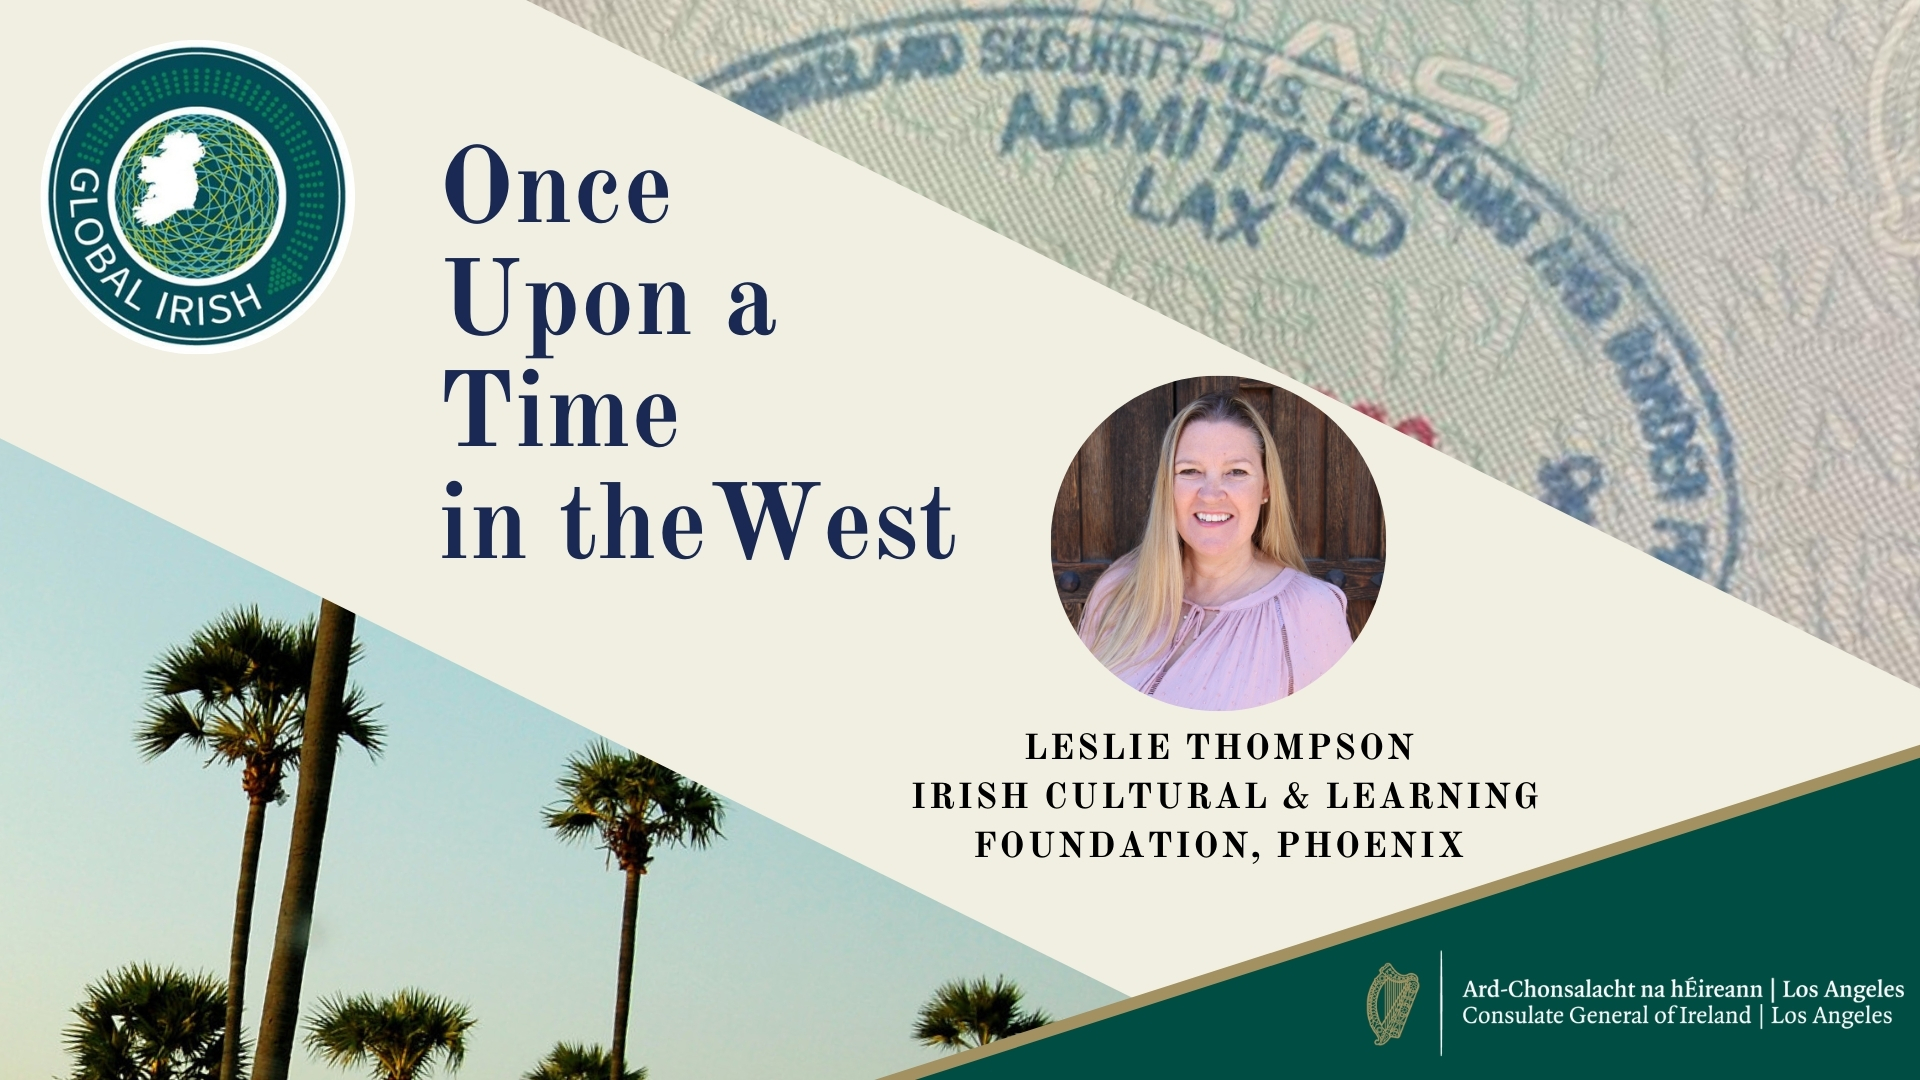 Interview with Leslie Thompson, Irish Cultural and Learning Foundation, Phoenix